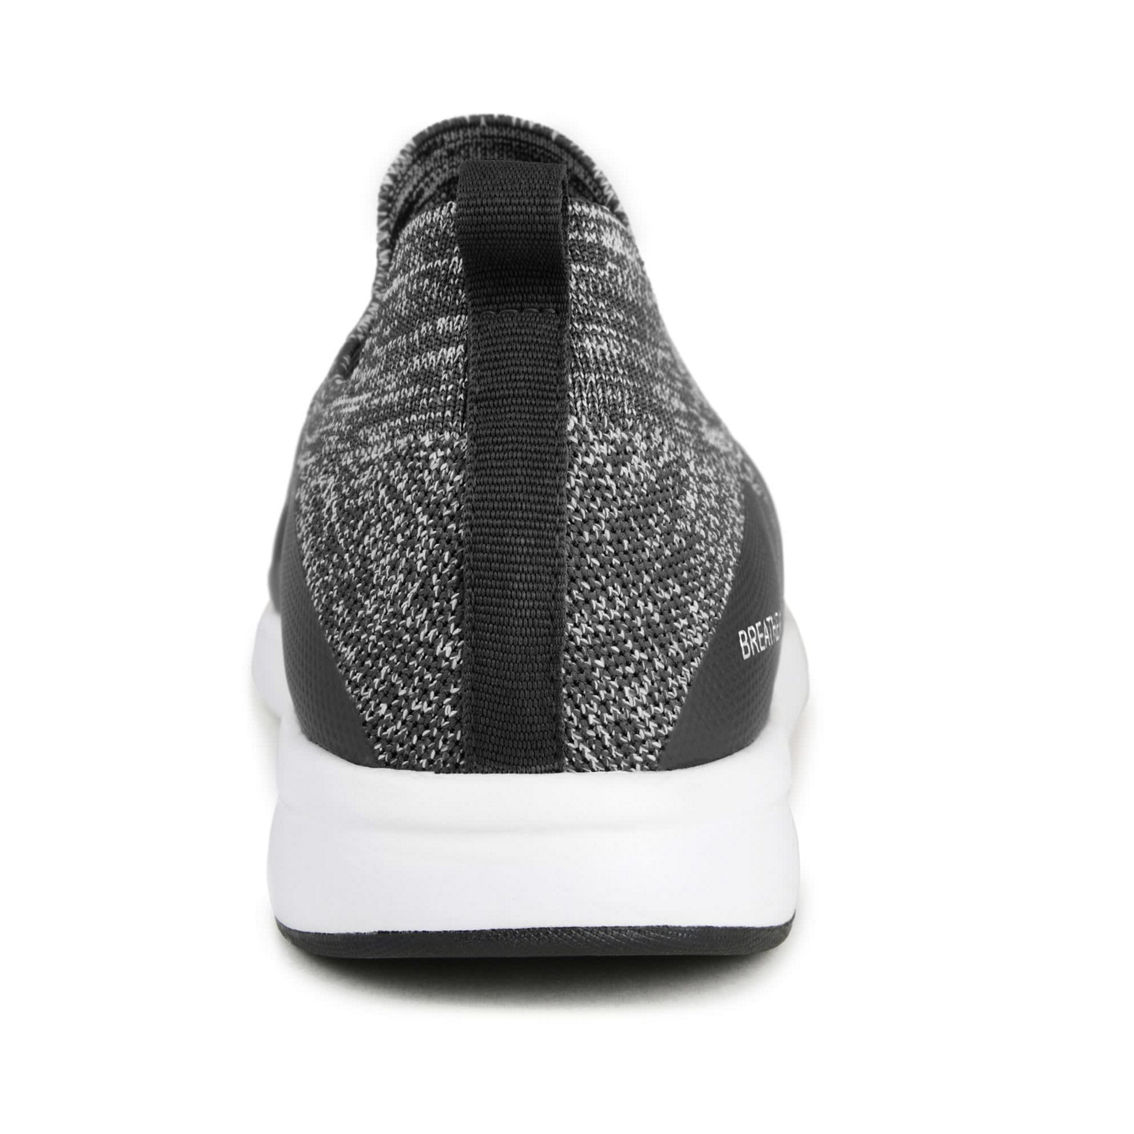 Vance Co. Cannon Casual Slip-on Knit Walking Sneaker - Image 3 of 5